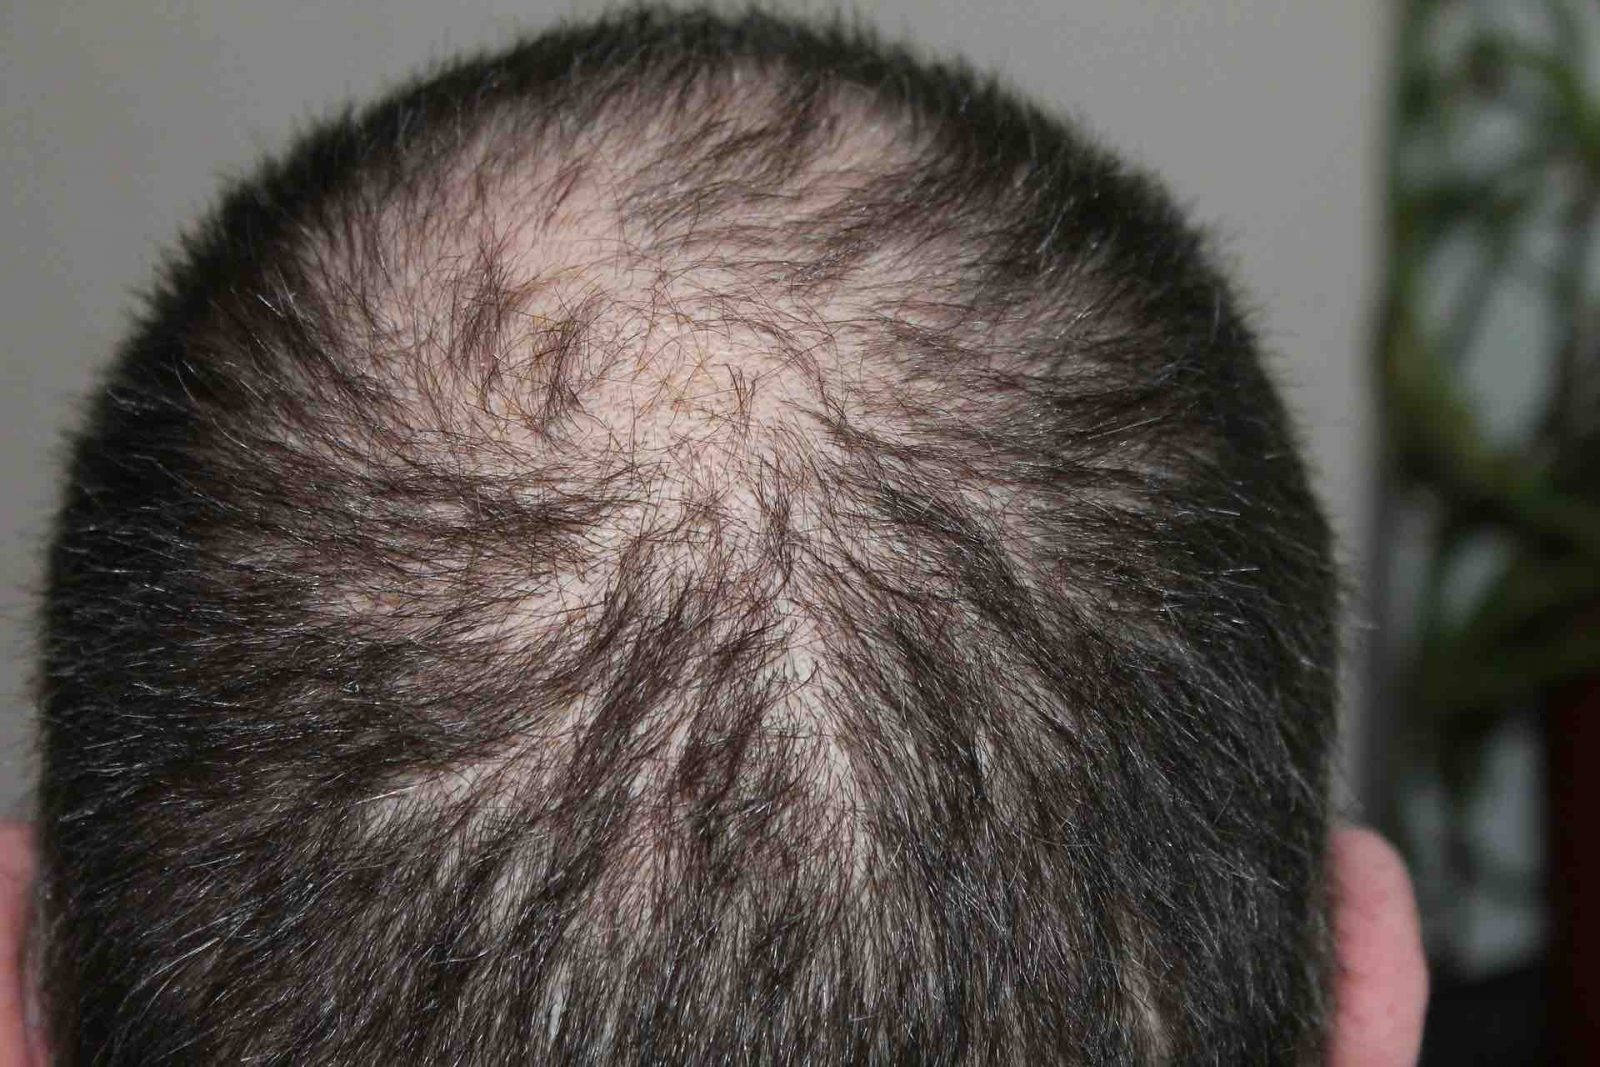 Top of man's head showing hair loss and thinning